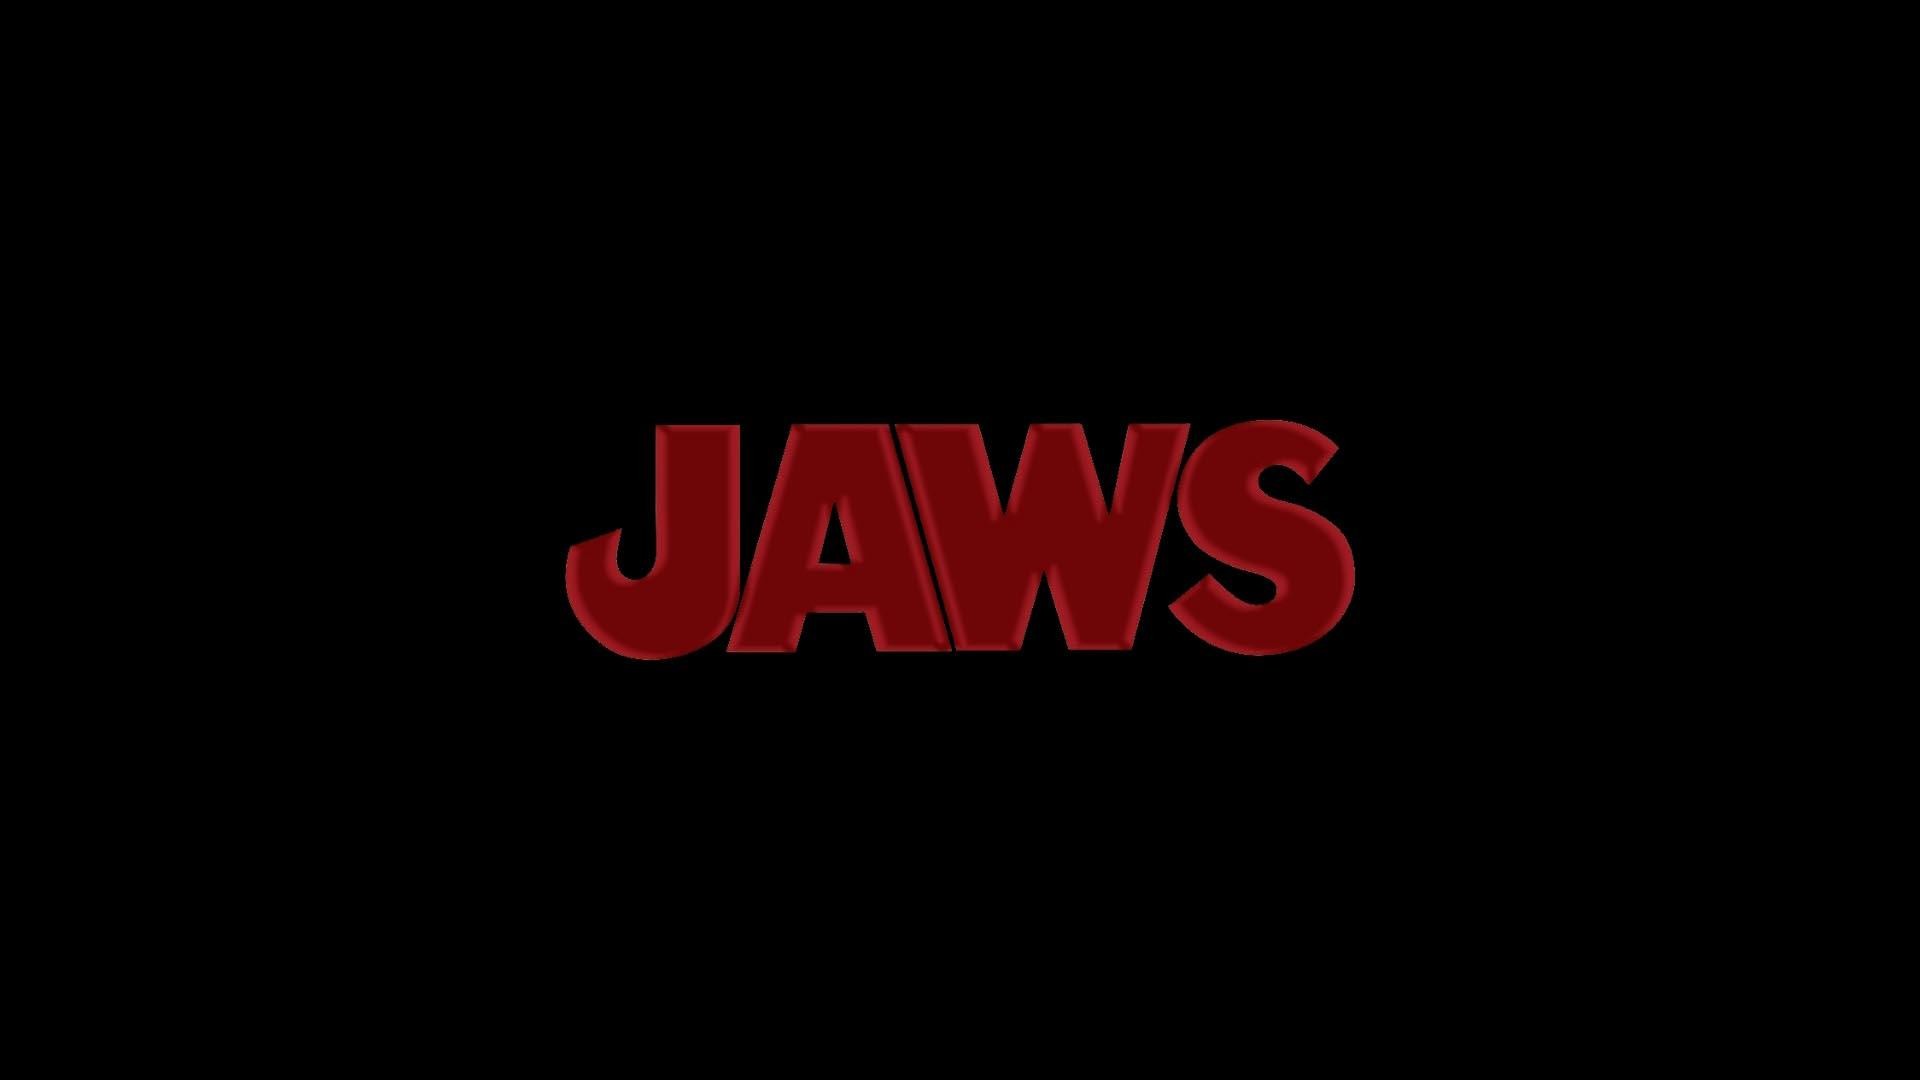 1920x1080 ... jaws wallpaper by nothingspecial1997 on DeviantArt ...